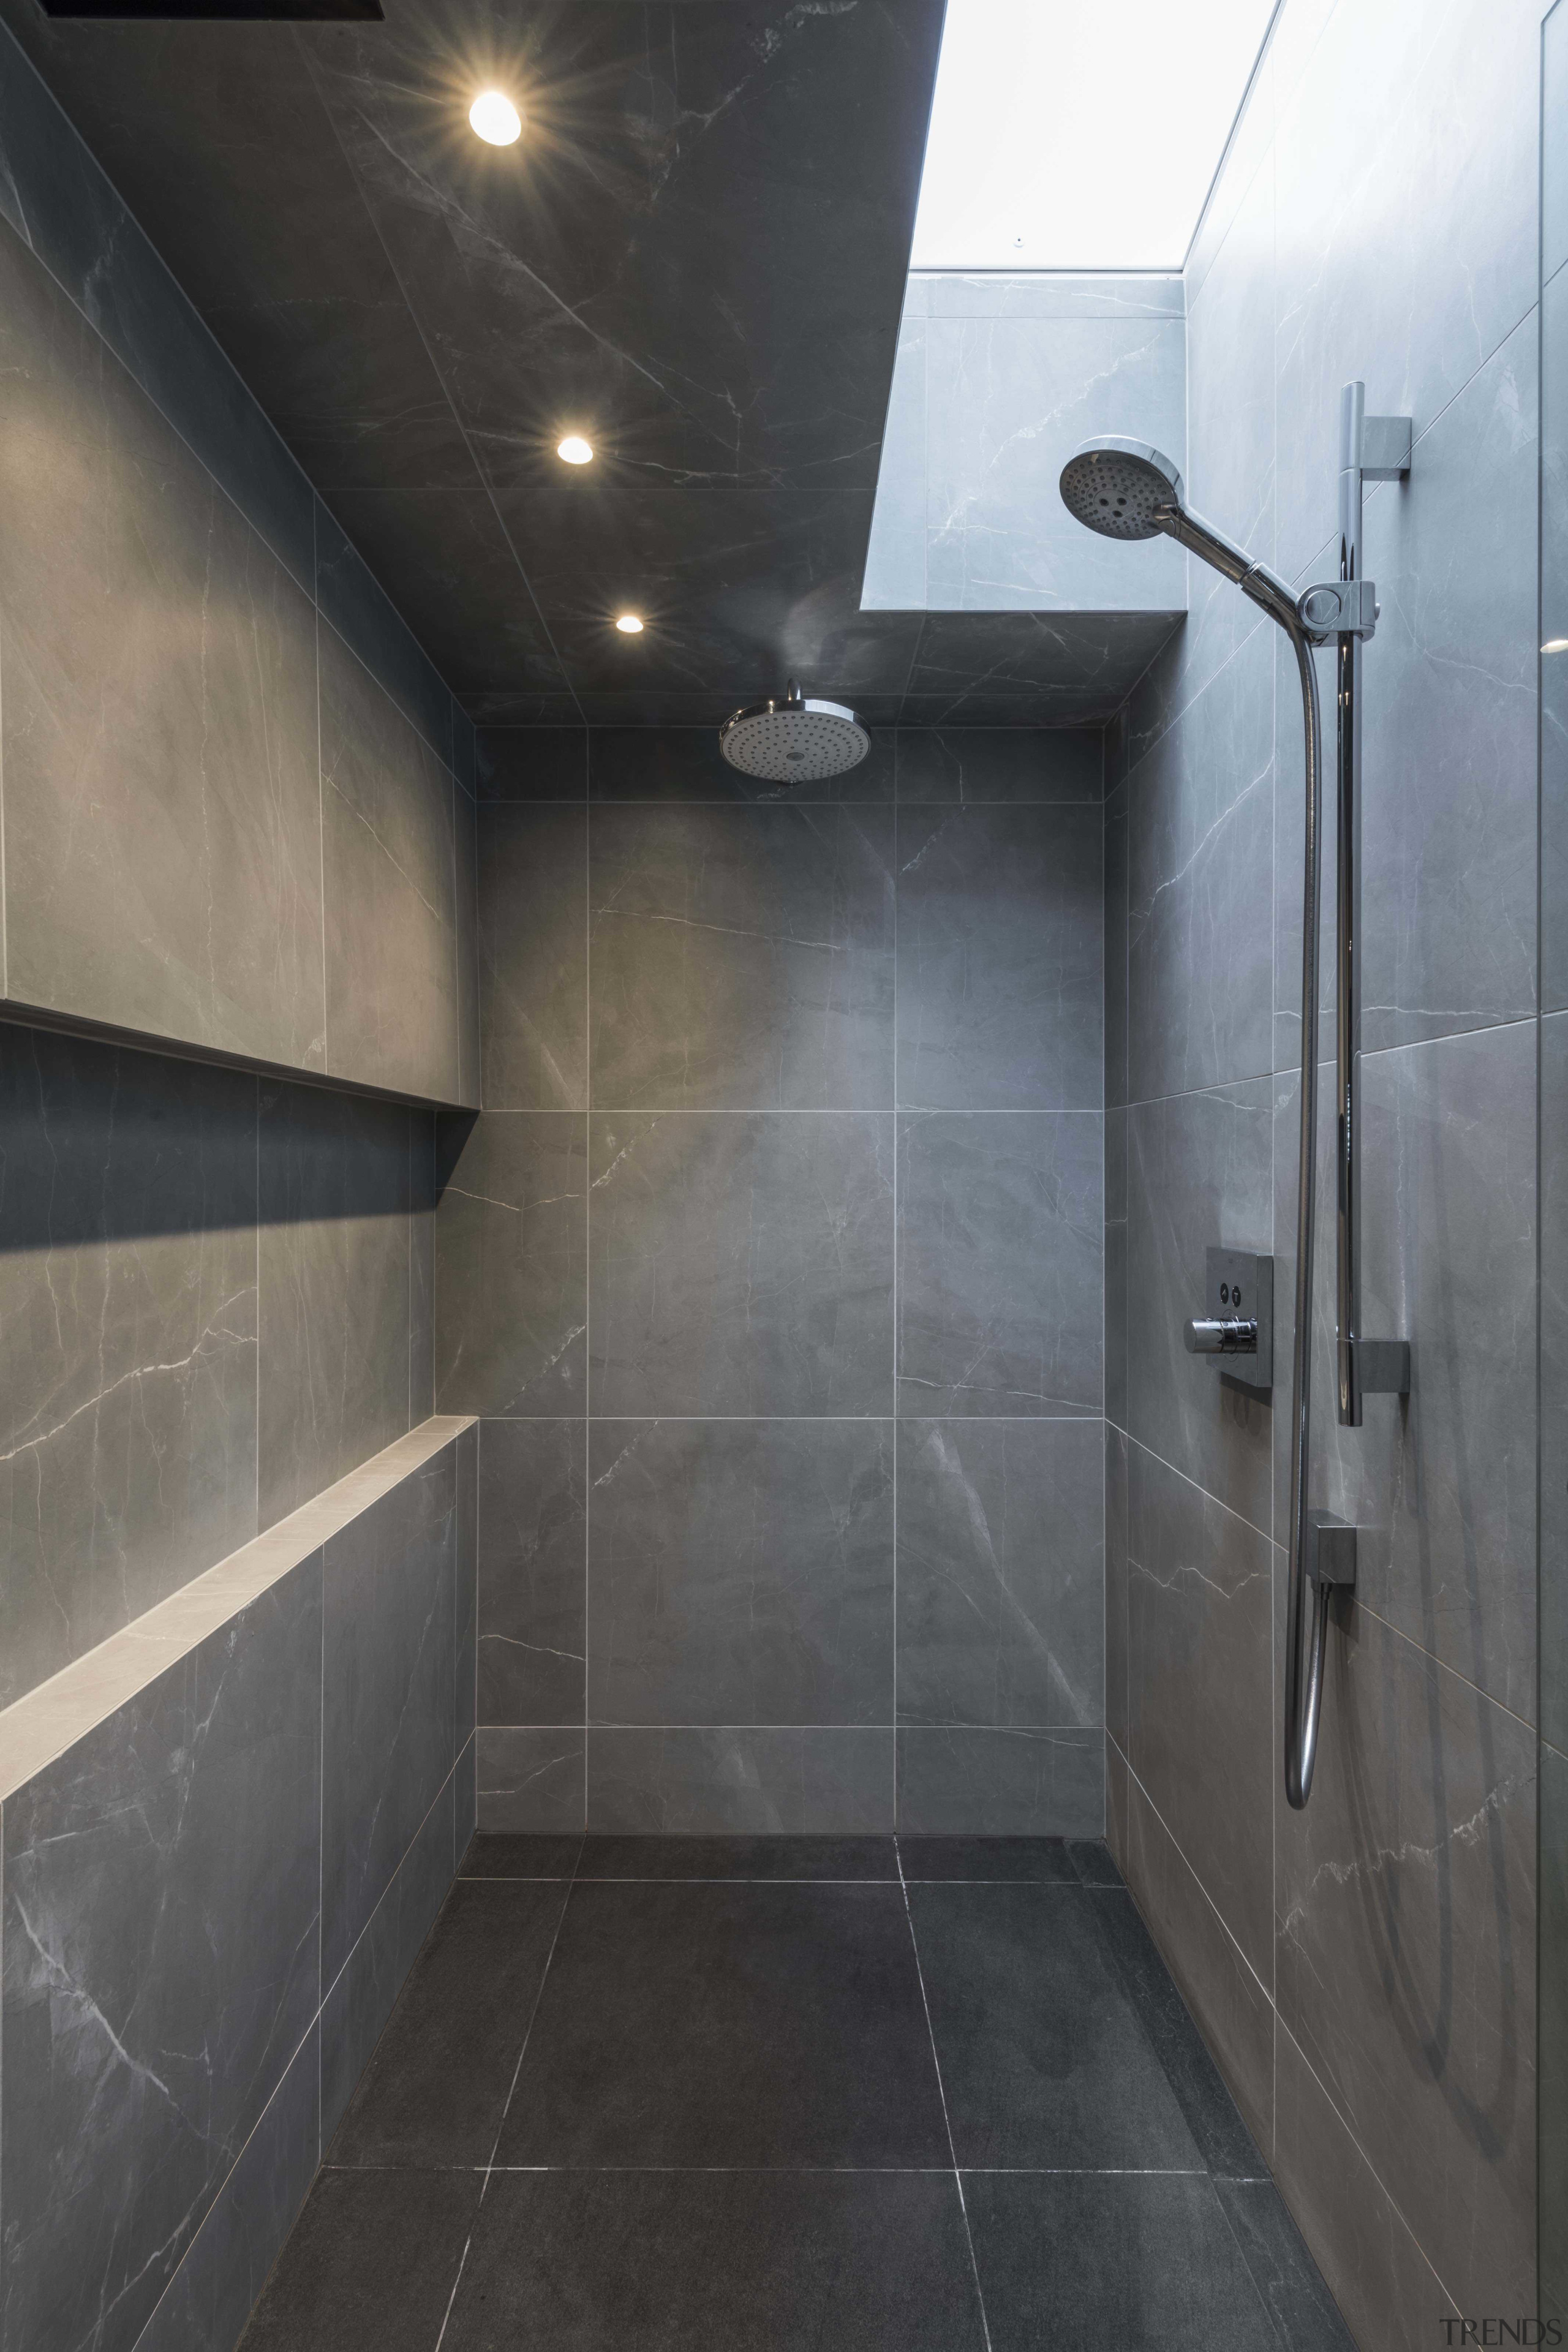 Bespoke cabinetry and spa-like bathing spaces for luxury architecture, bathroom, floor, flooring, plumbing fixture, room, shower, tile, black, gray